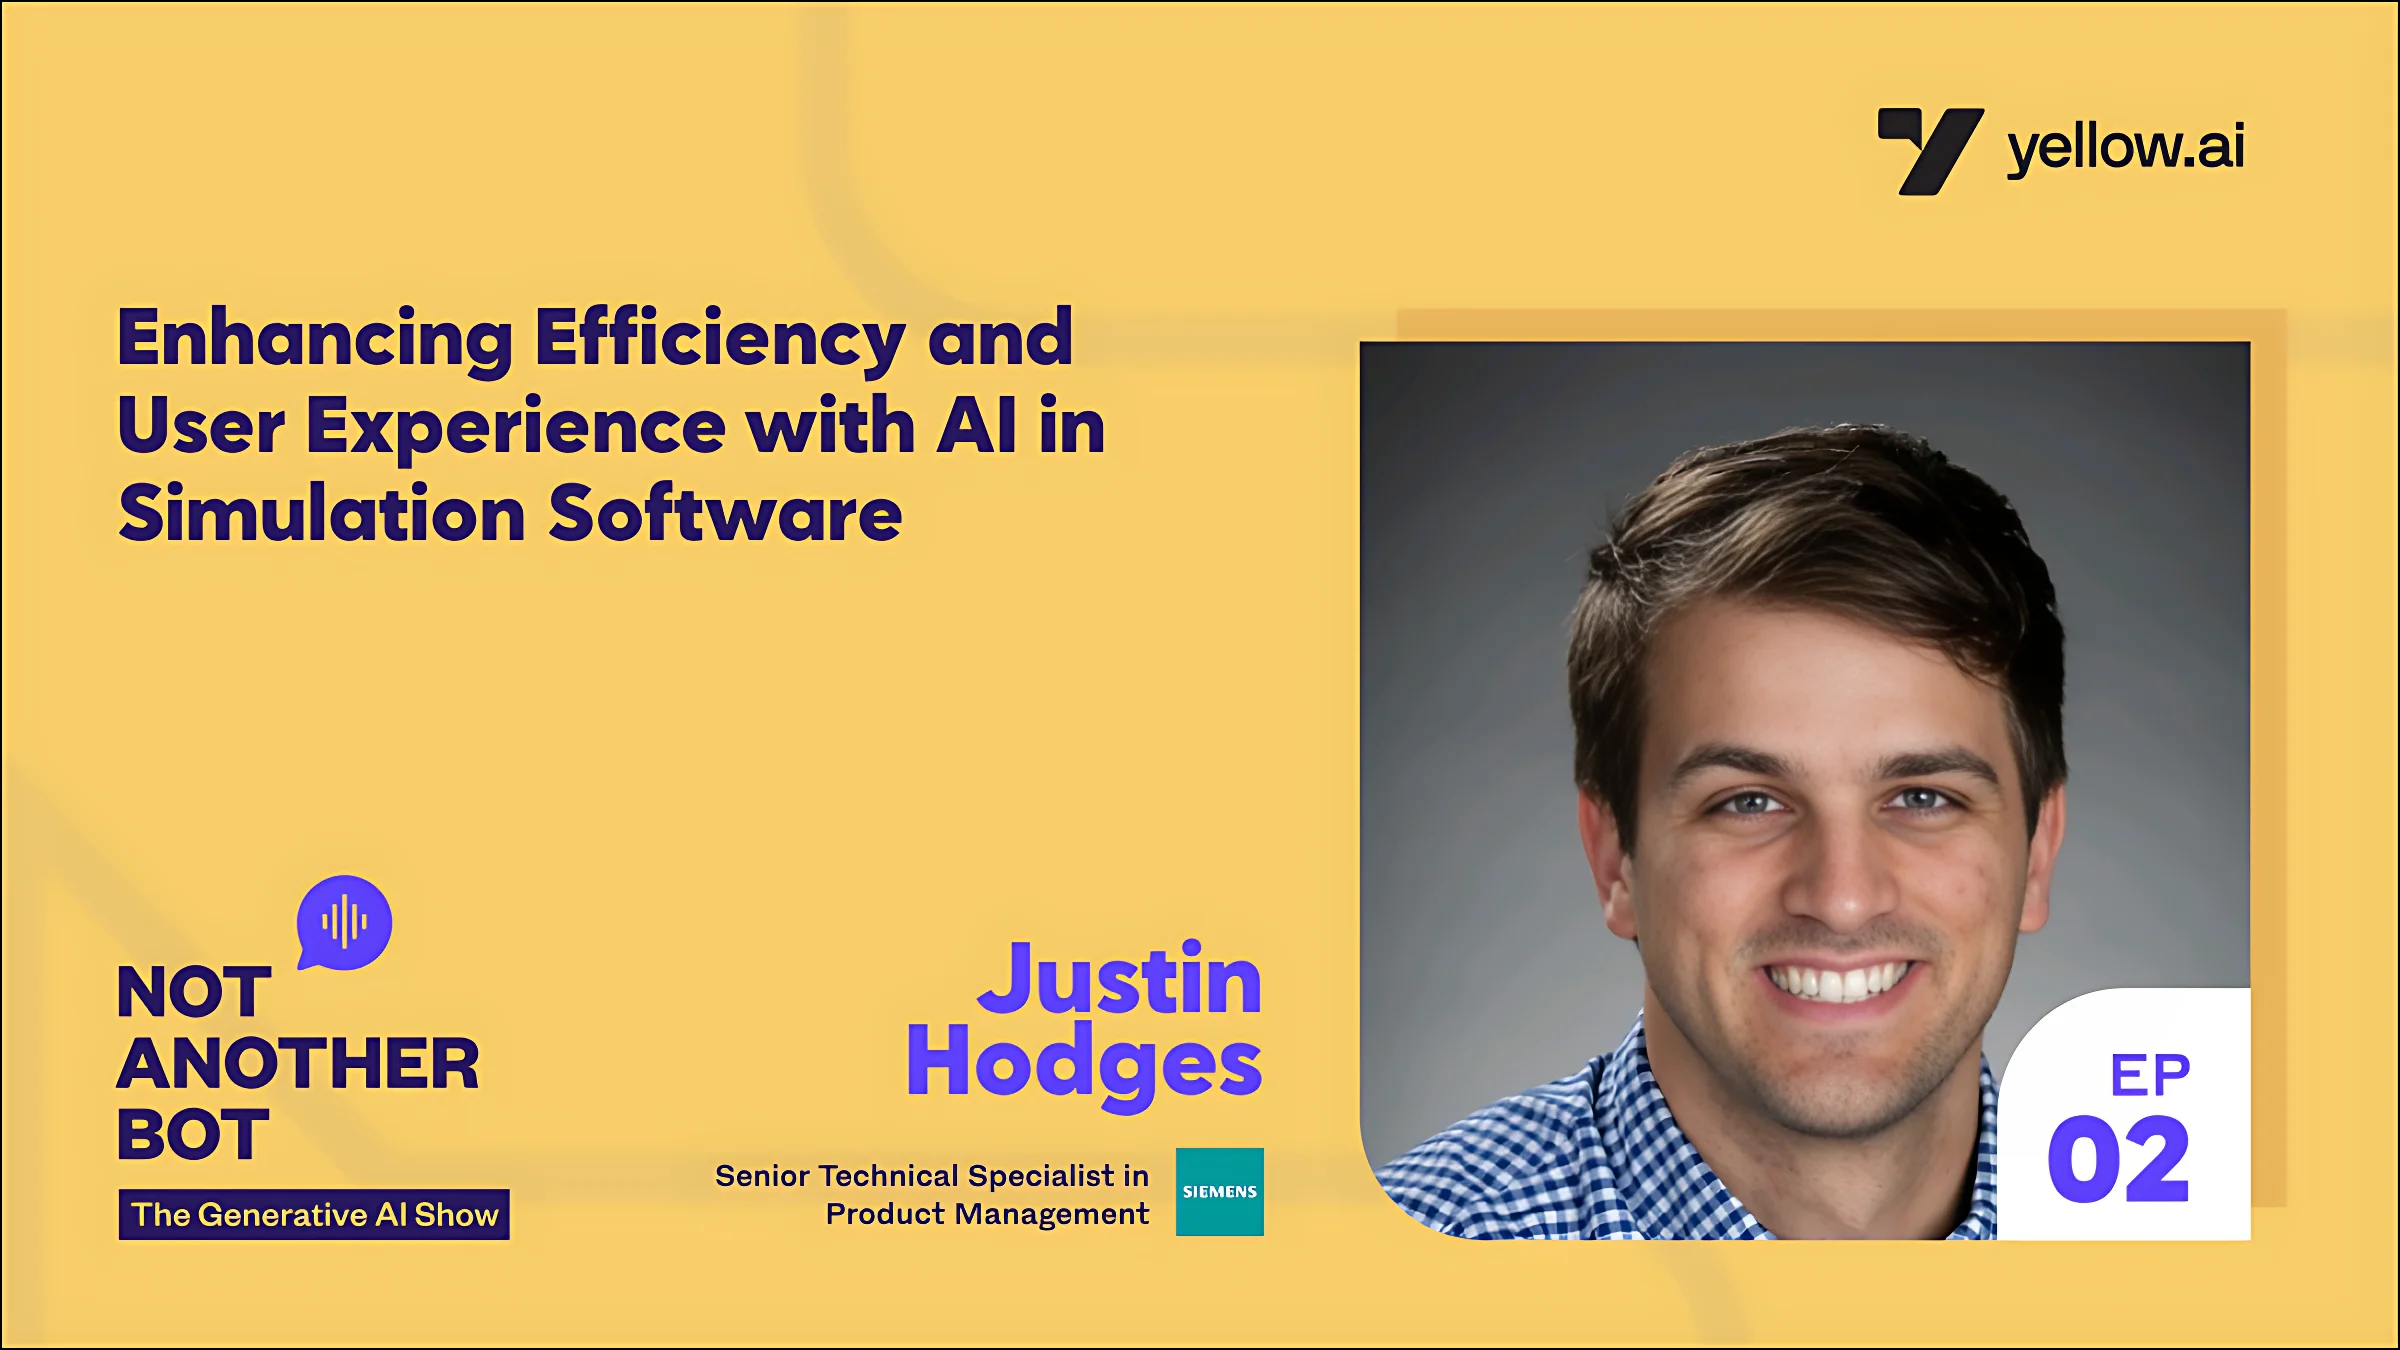 Justin Hodges - Not another Bot podcast with Yellow.ai